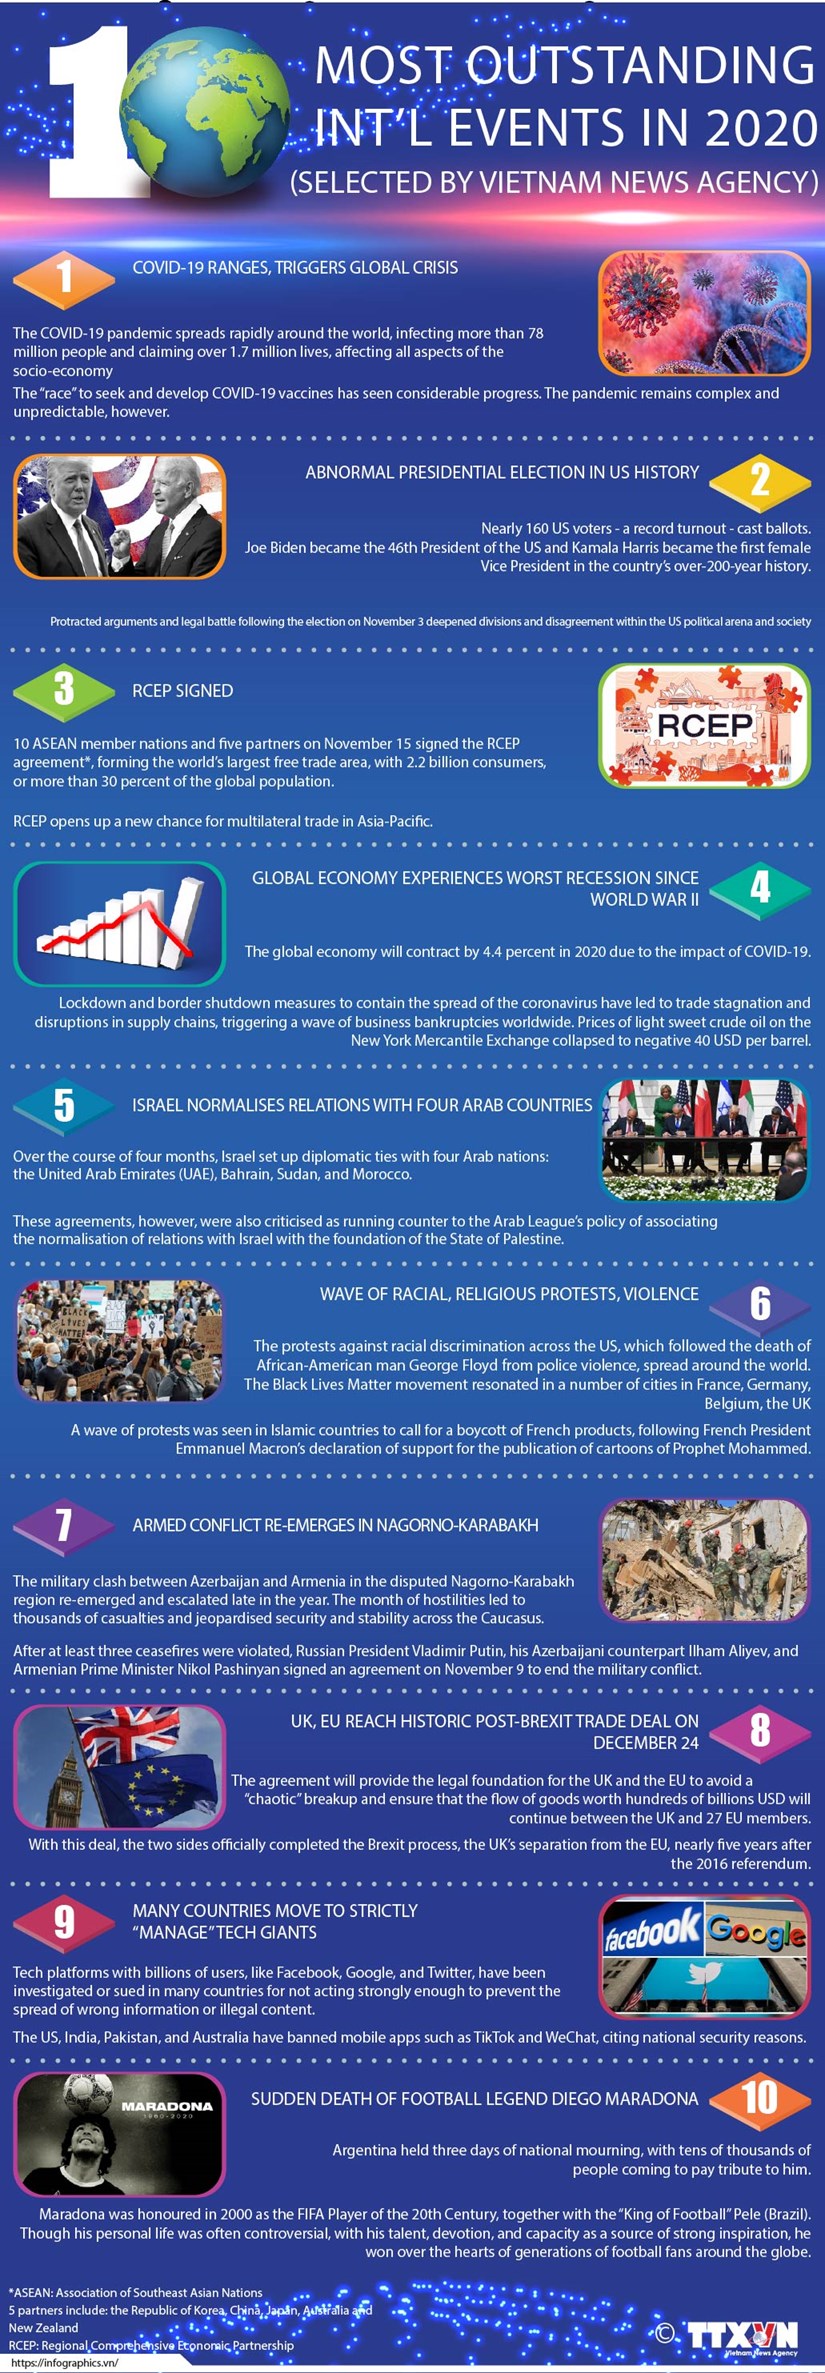 Top 10 most outstanding international events in 2020 hinh anh 1